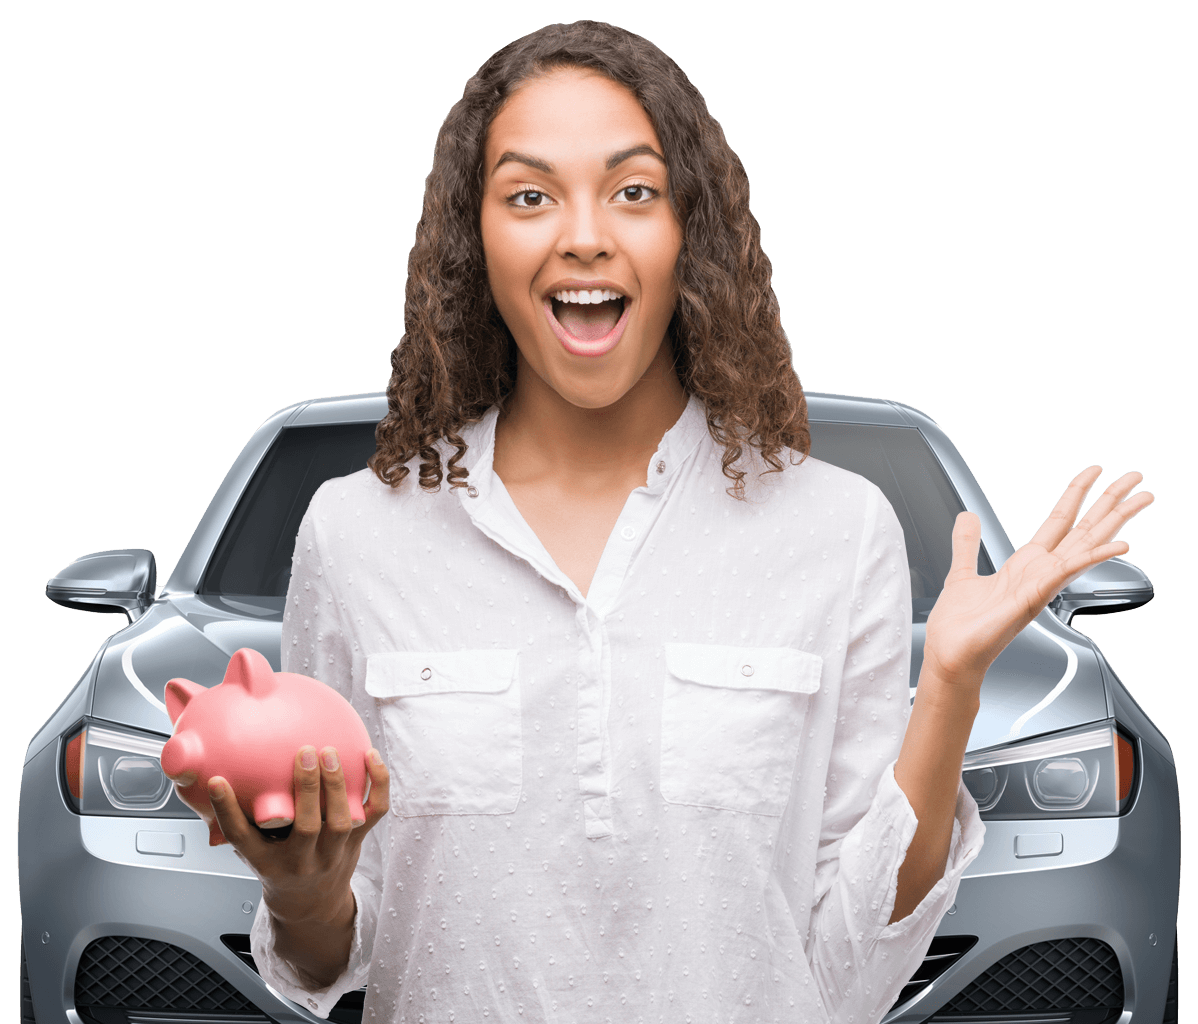 Cheap car insurance makes smiling young woman holding a piggy bank happy.